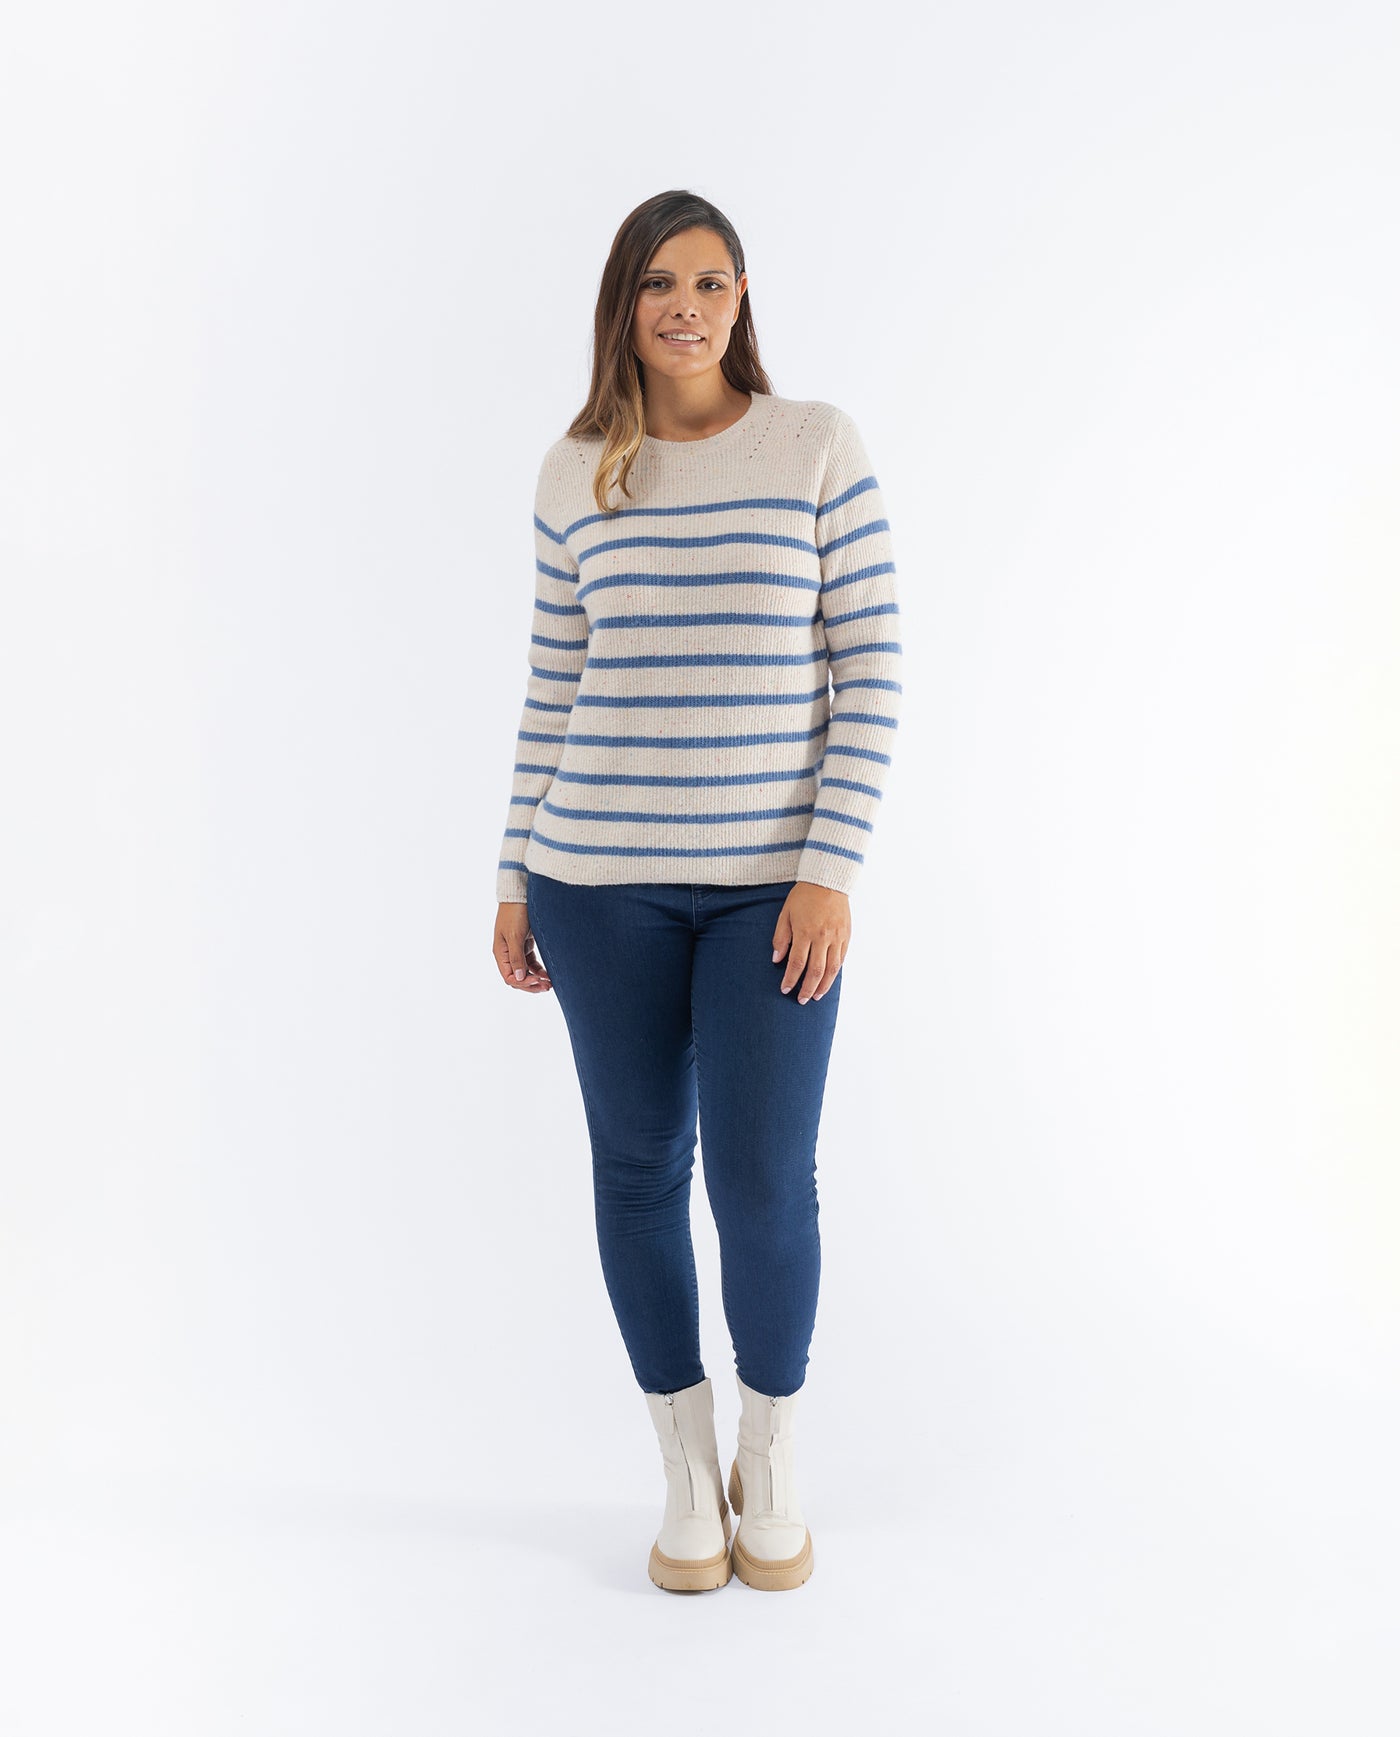 STRIPED SWEATER AND BLUE CHEVIOT